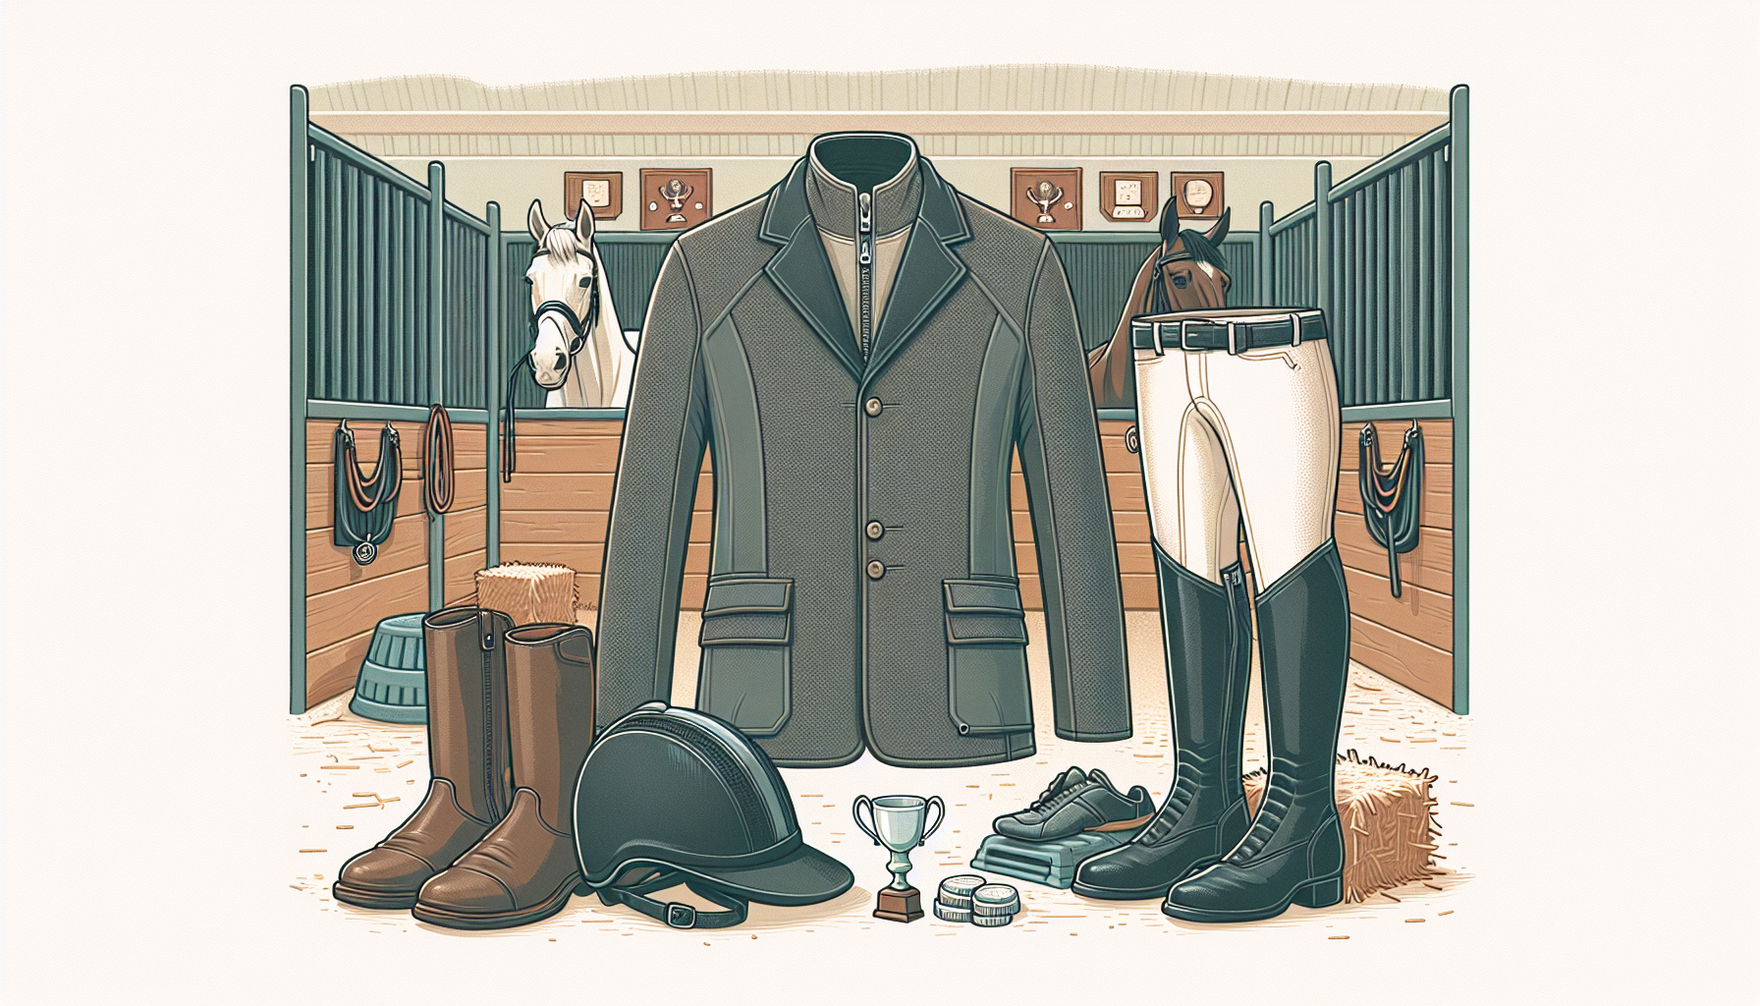 Illustration of essential jumping gear for equestrian competitions. It features a helmet, a protective riding jacket, riding boots, and jodhpurs, all set out ready for use. The background is a stable 